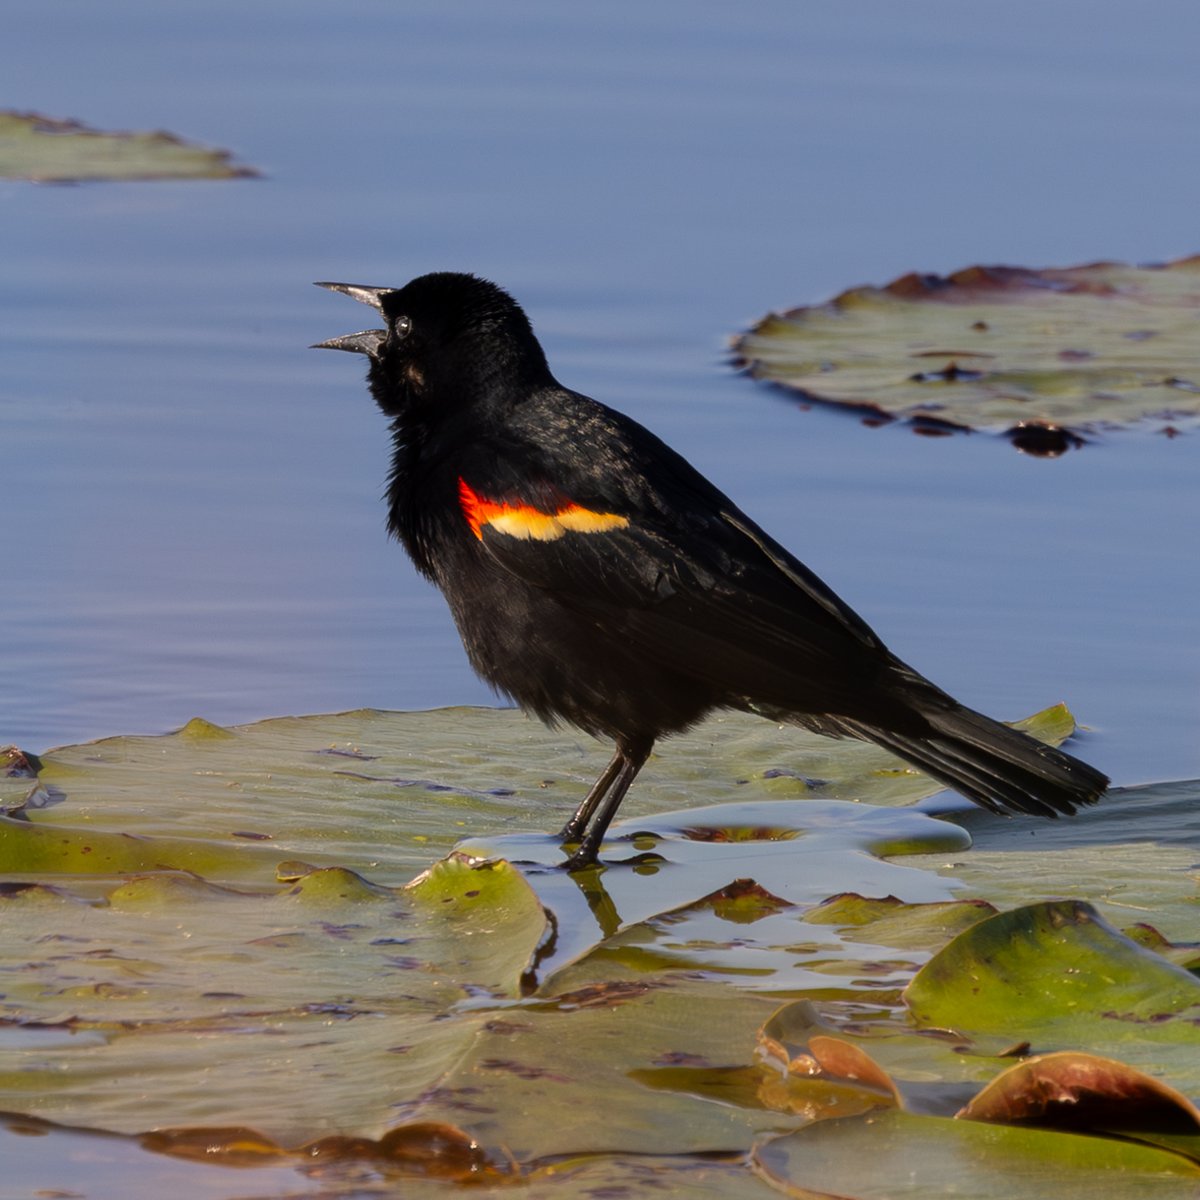 This red-winged blackbird would land on lily pads and hop around to find a snack. #StMarksRefuge #FloridaBirds